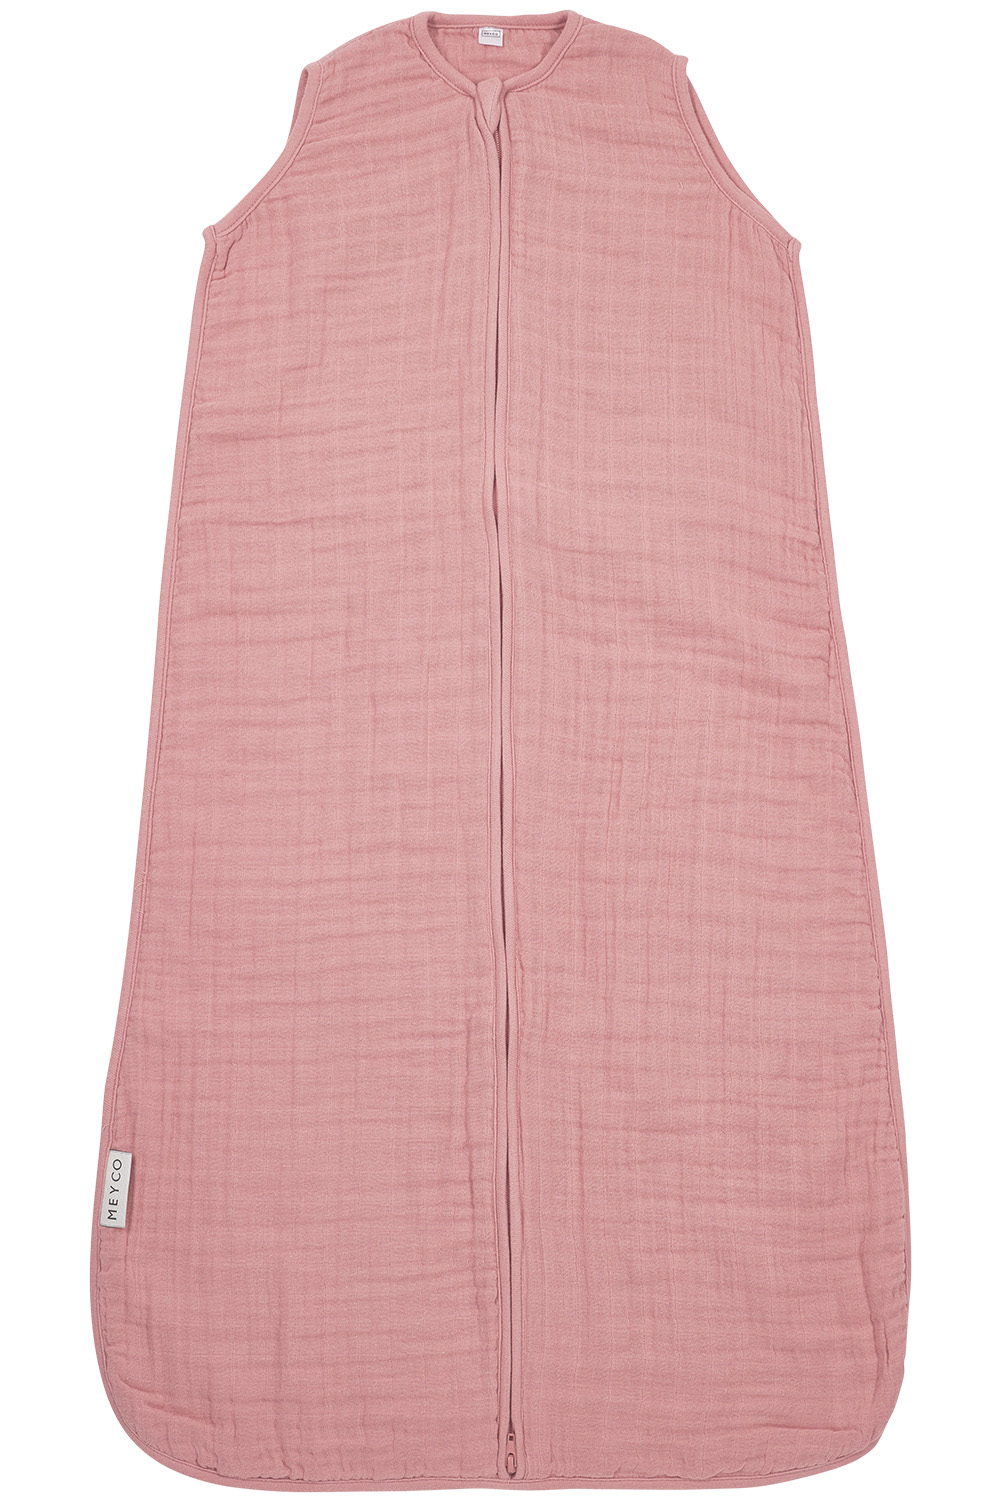 Schlafsack pre-washed musselin Uni - old pink - 110cm